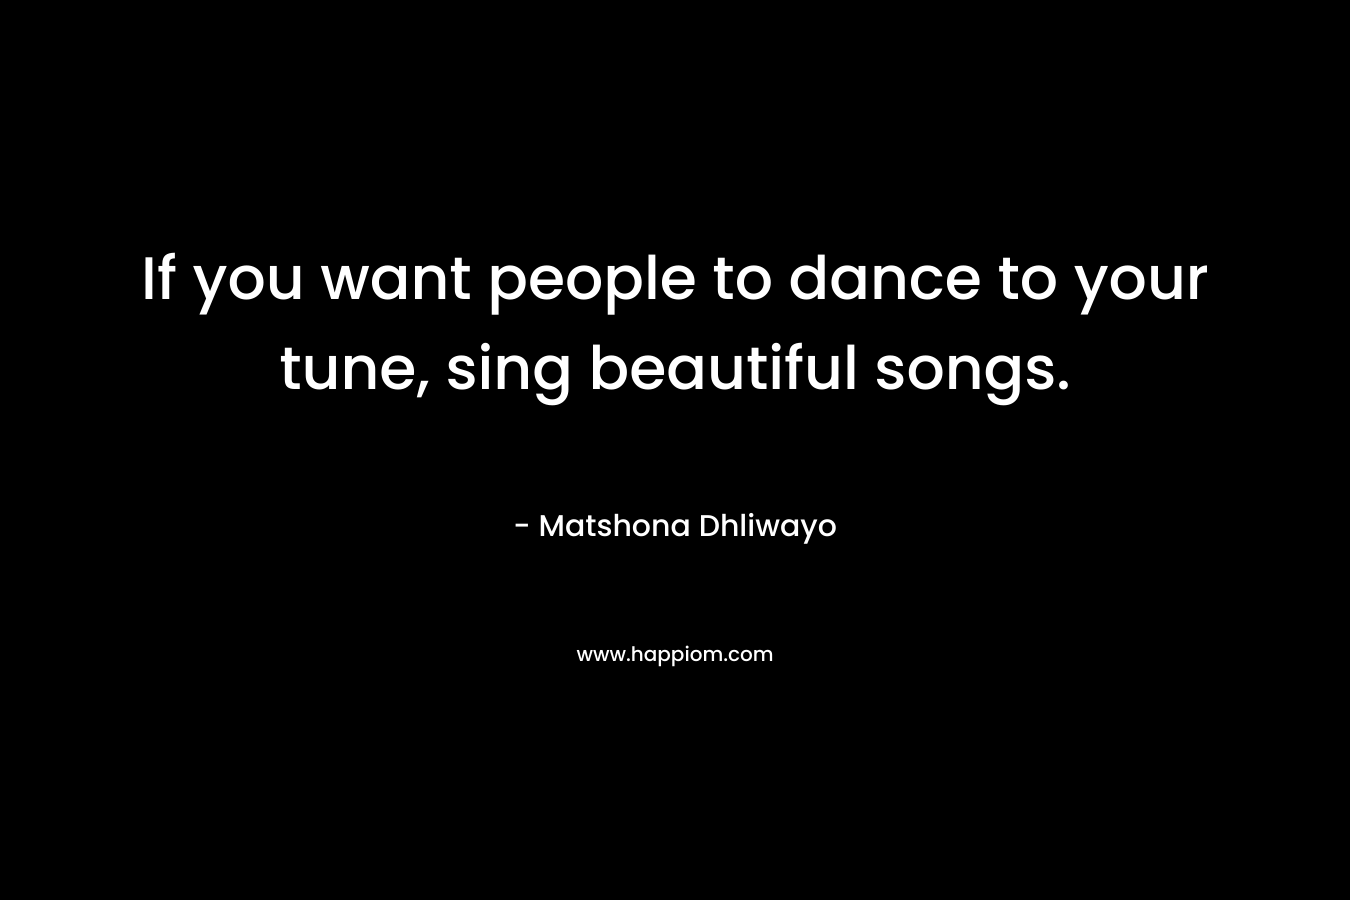 If you want people to dance to your tune, sing beautiful songs.